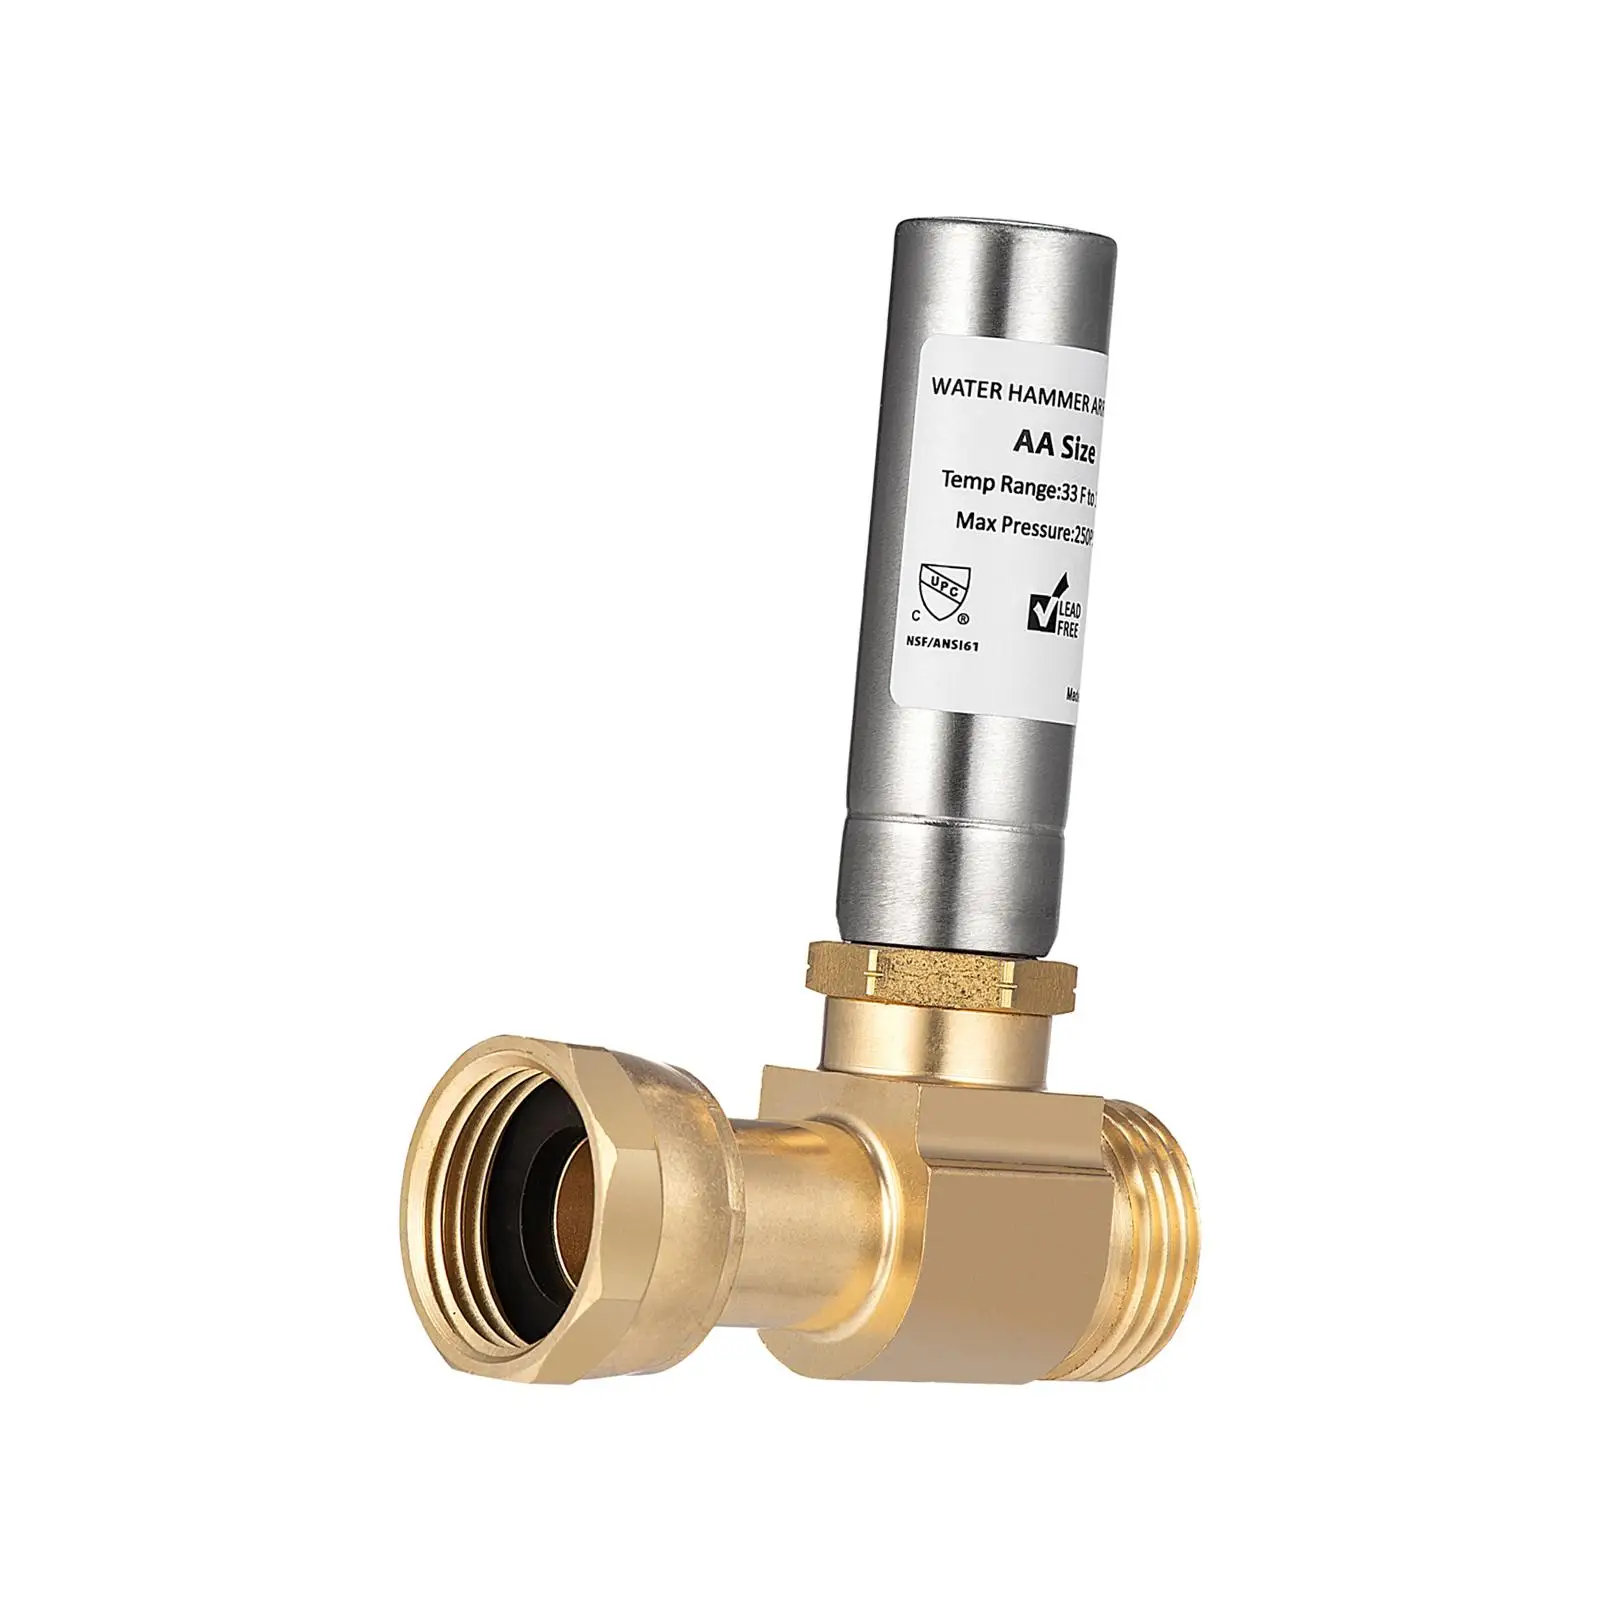 Water Hammer Arrestor High Temperature Brass Easy to Install Pressure Reducer for Washer Laundry Pipe Laundry Room Hotel Kitchen